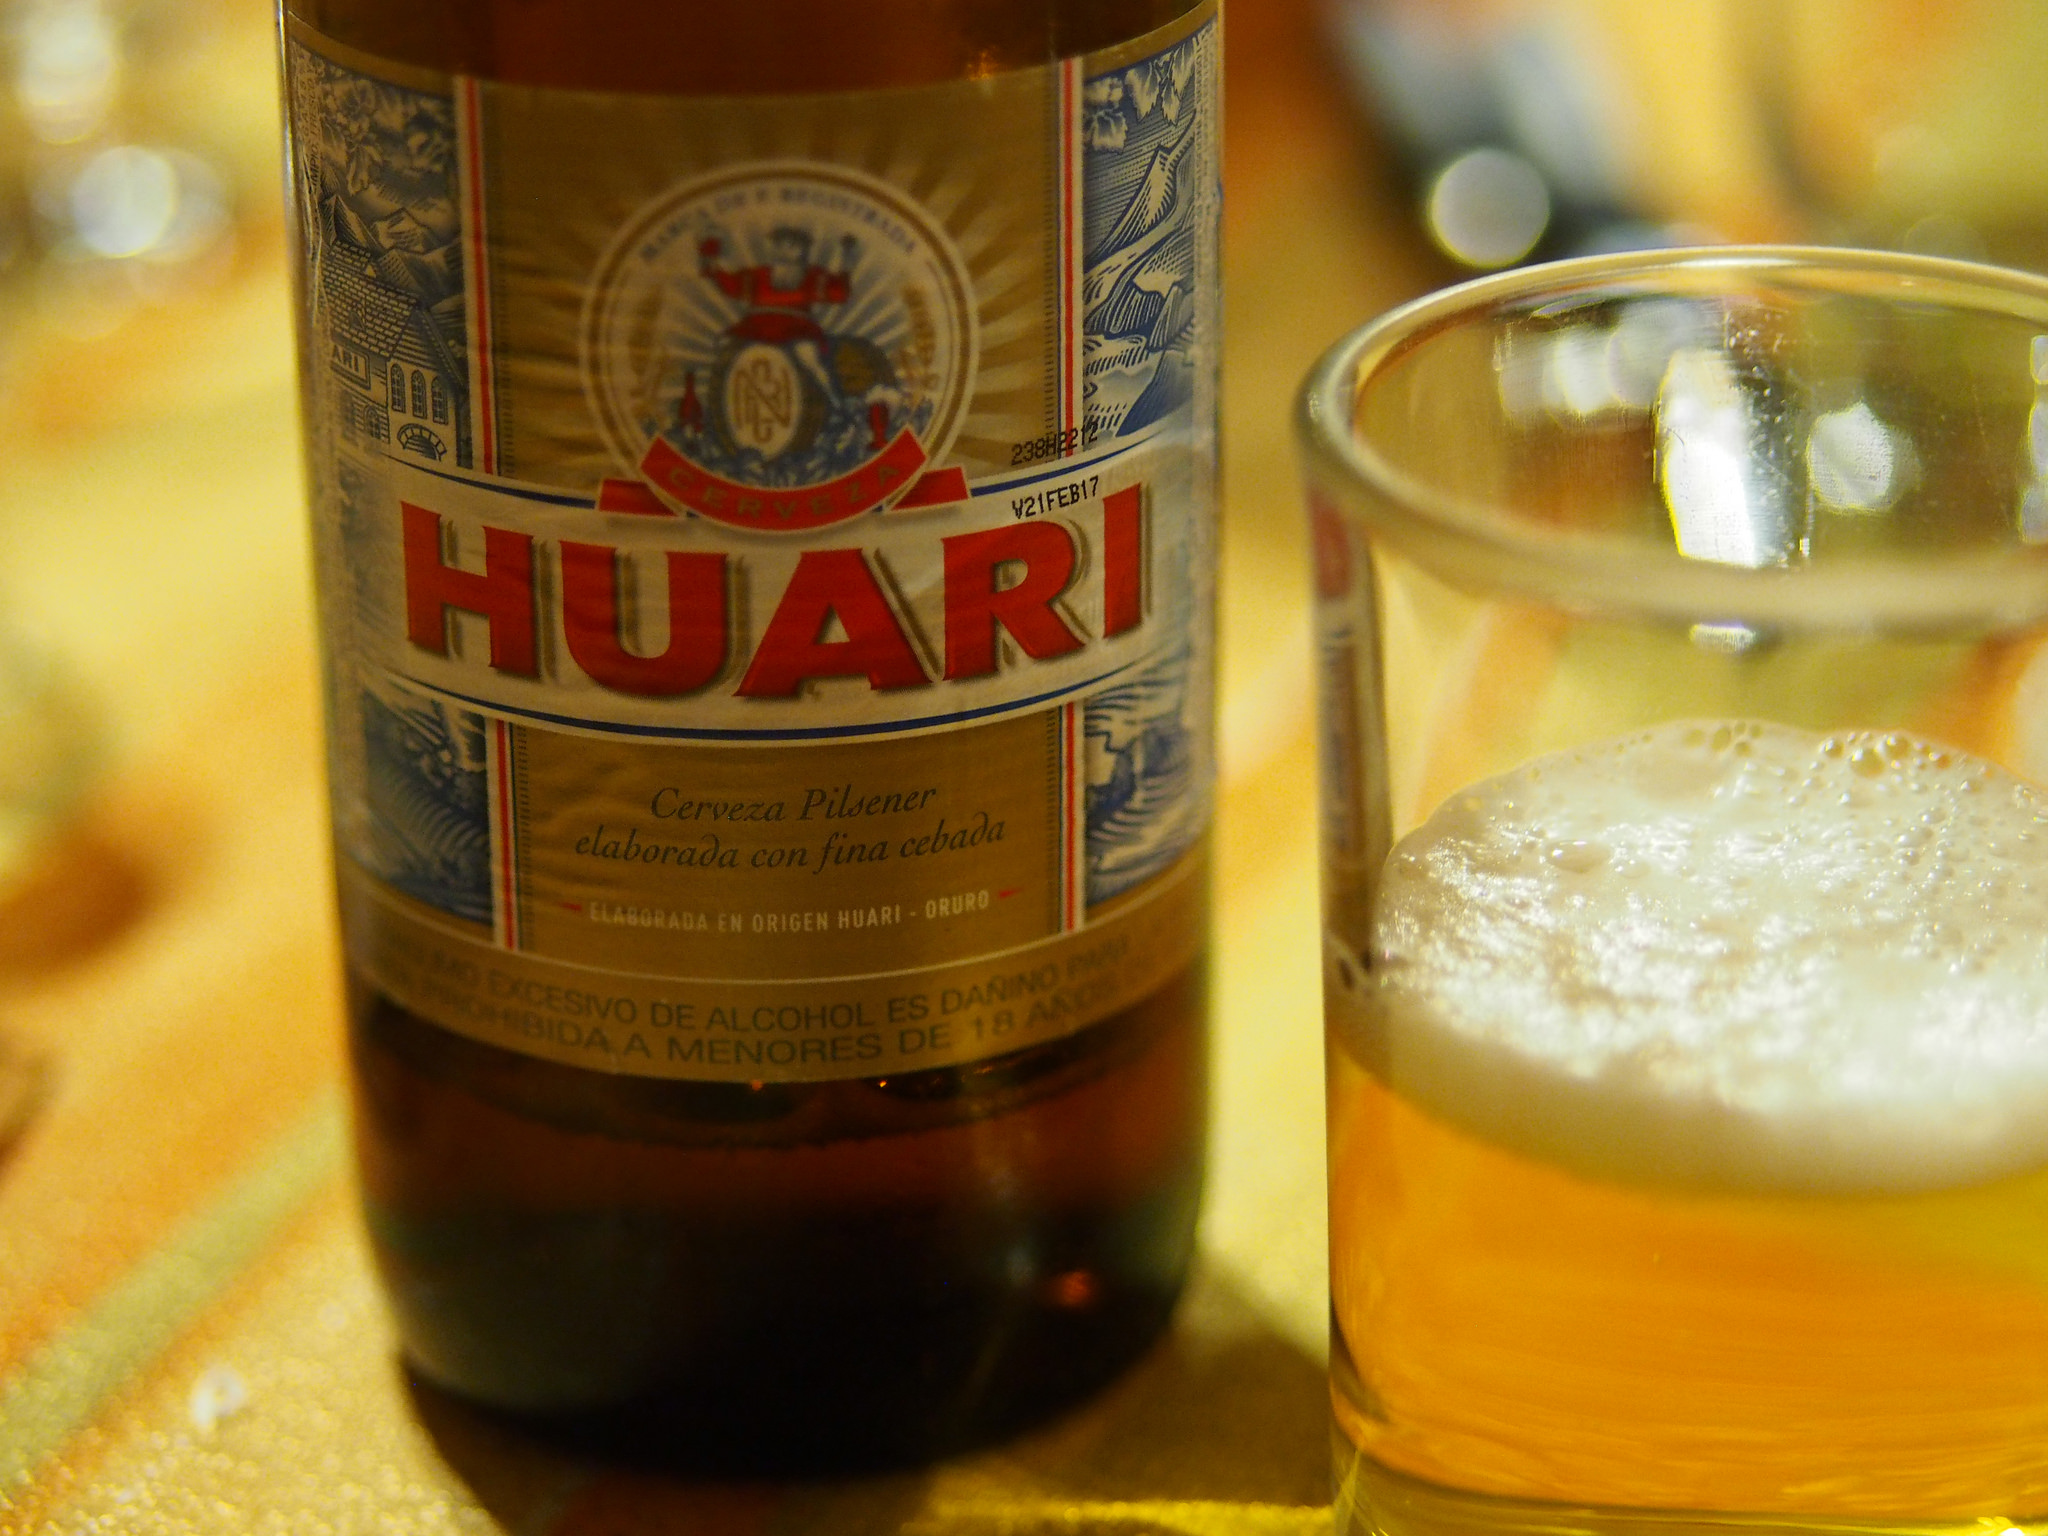  Popular Bolivian beers include Huari, Taquiña, and Paceña—all lagers. 